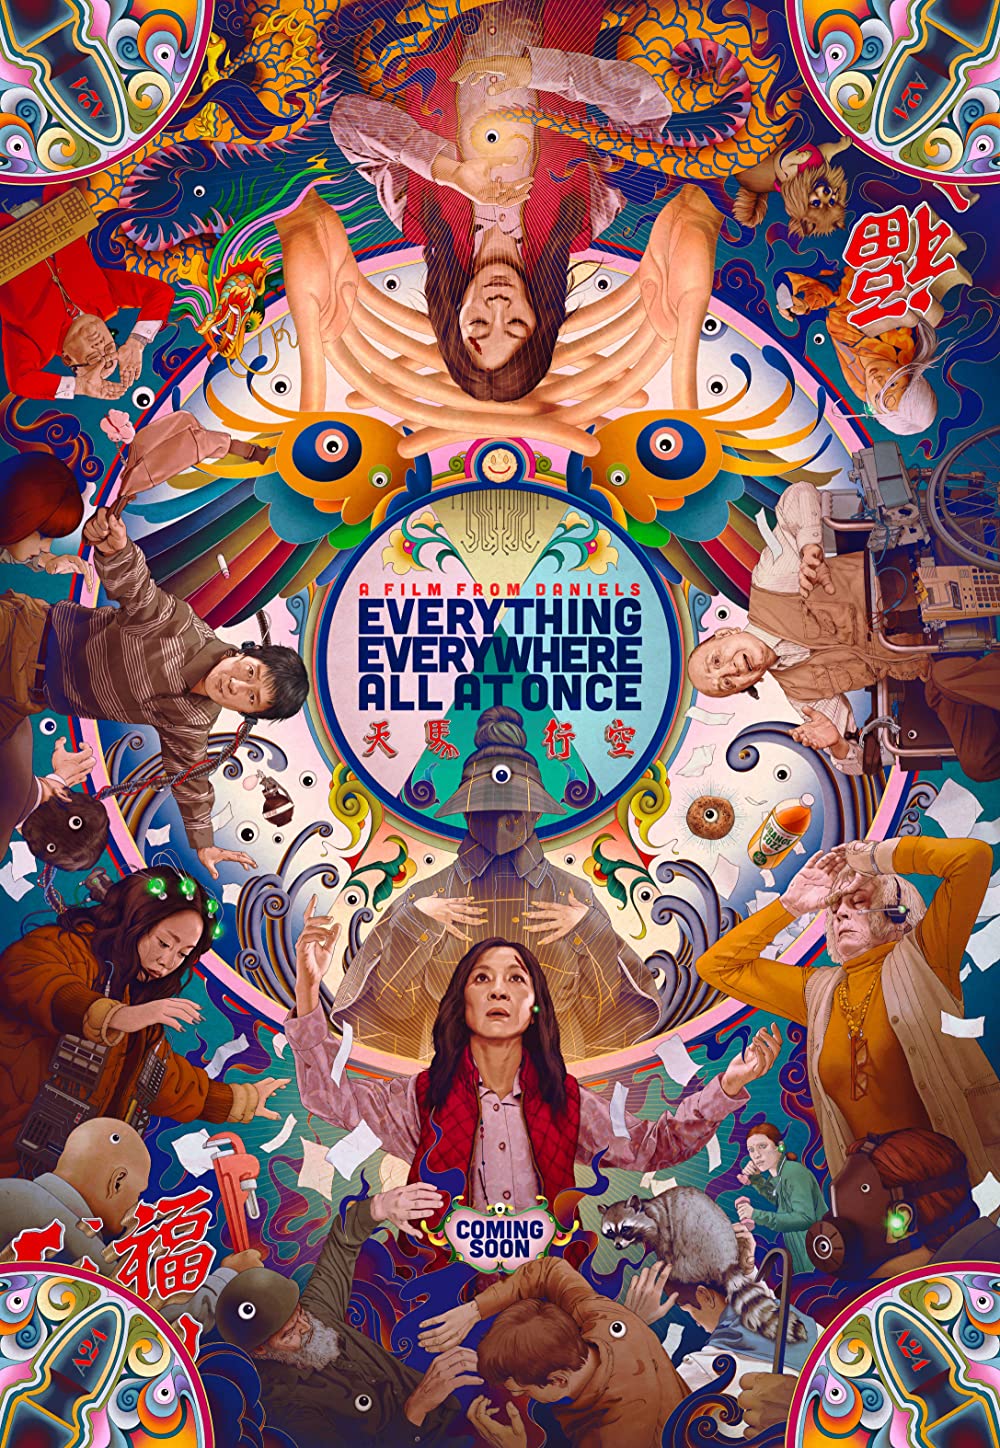 Cover Art for "Everything, Everywhere All at Once'